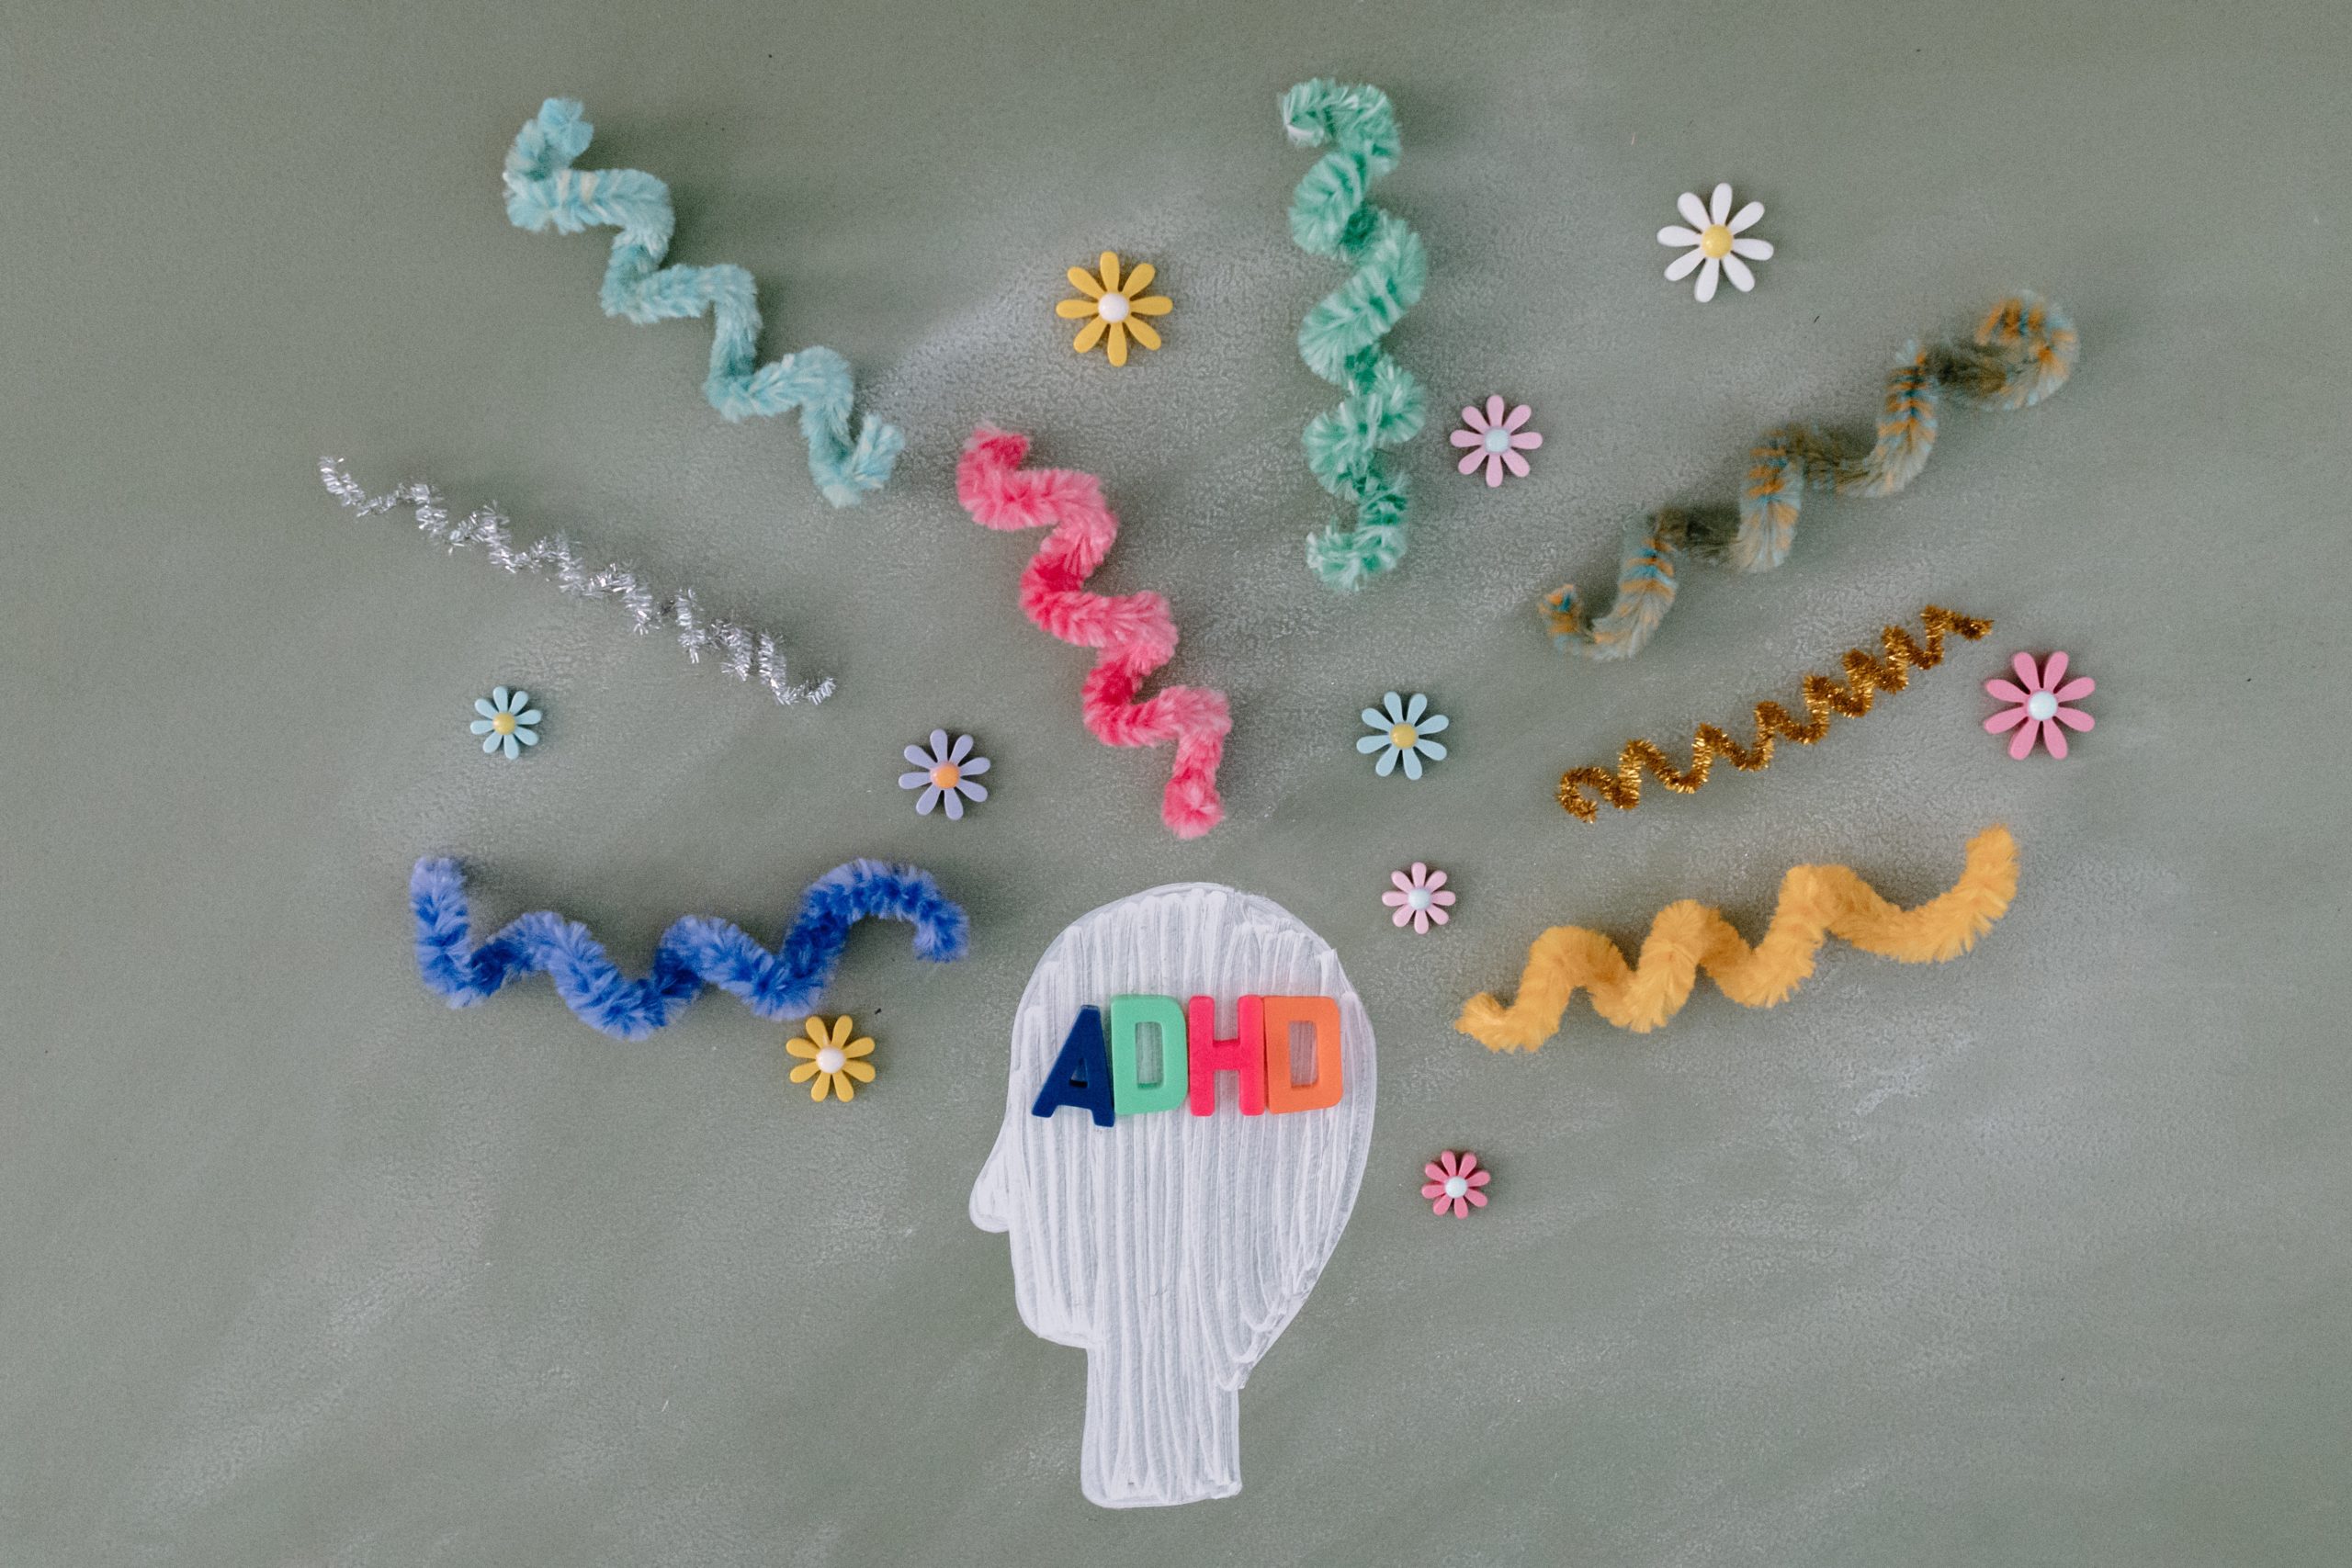 A head is drawn on a green chalkboard. Magnetic letters that spell, "ADHD,' lie on the head. Twisted pipe cleaners and small flowers surround the head.